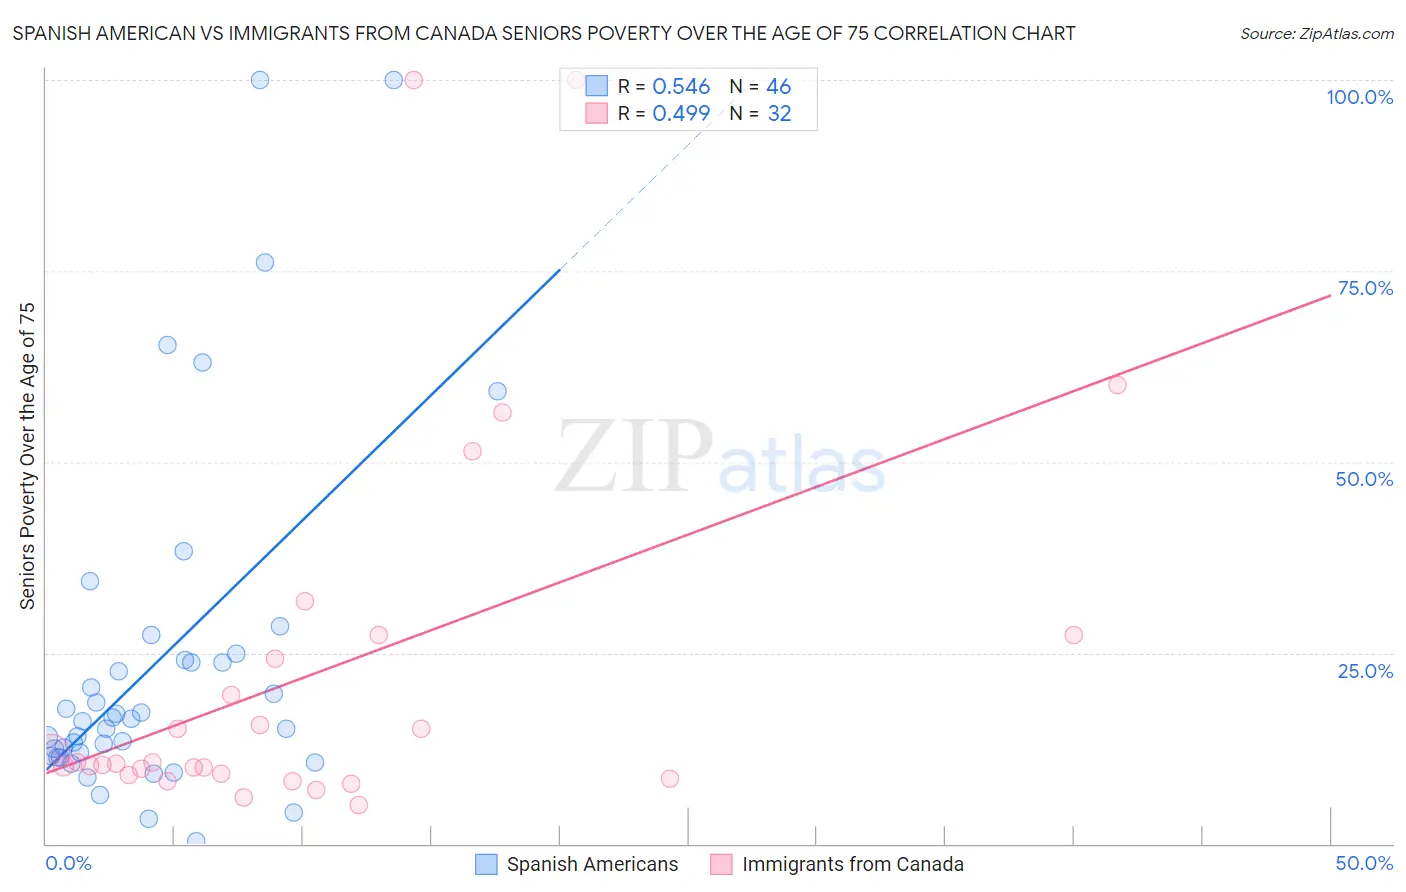 Spanish American vs Immigrants from Canada Seniors Poverty Over the Age of 75